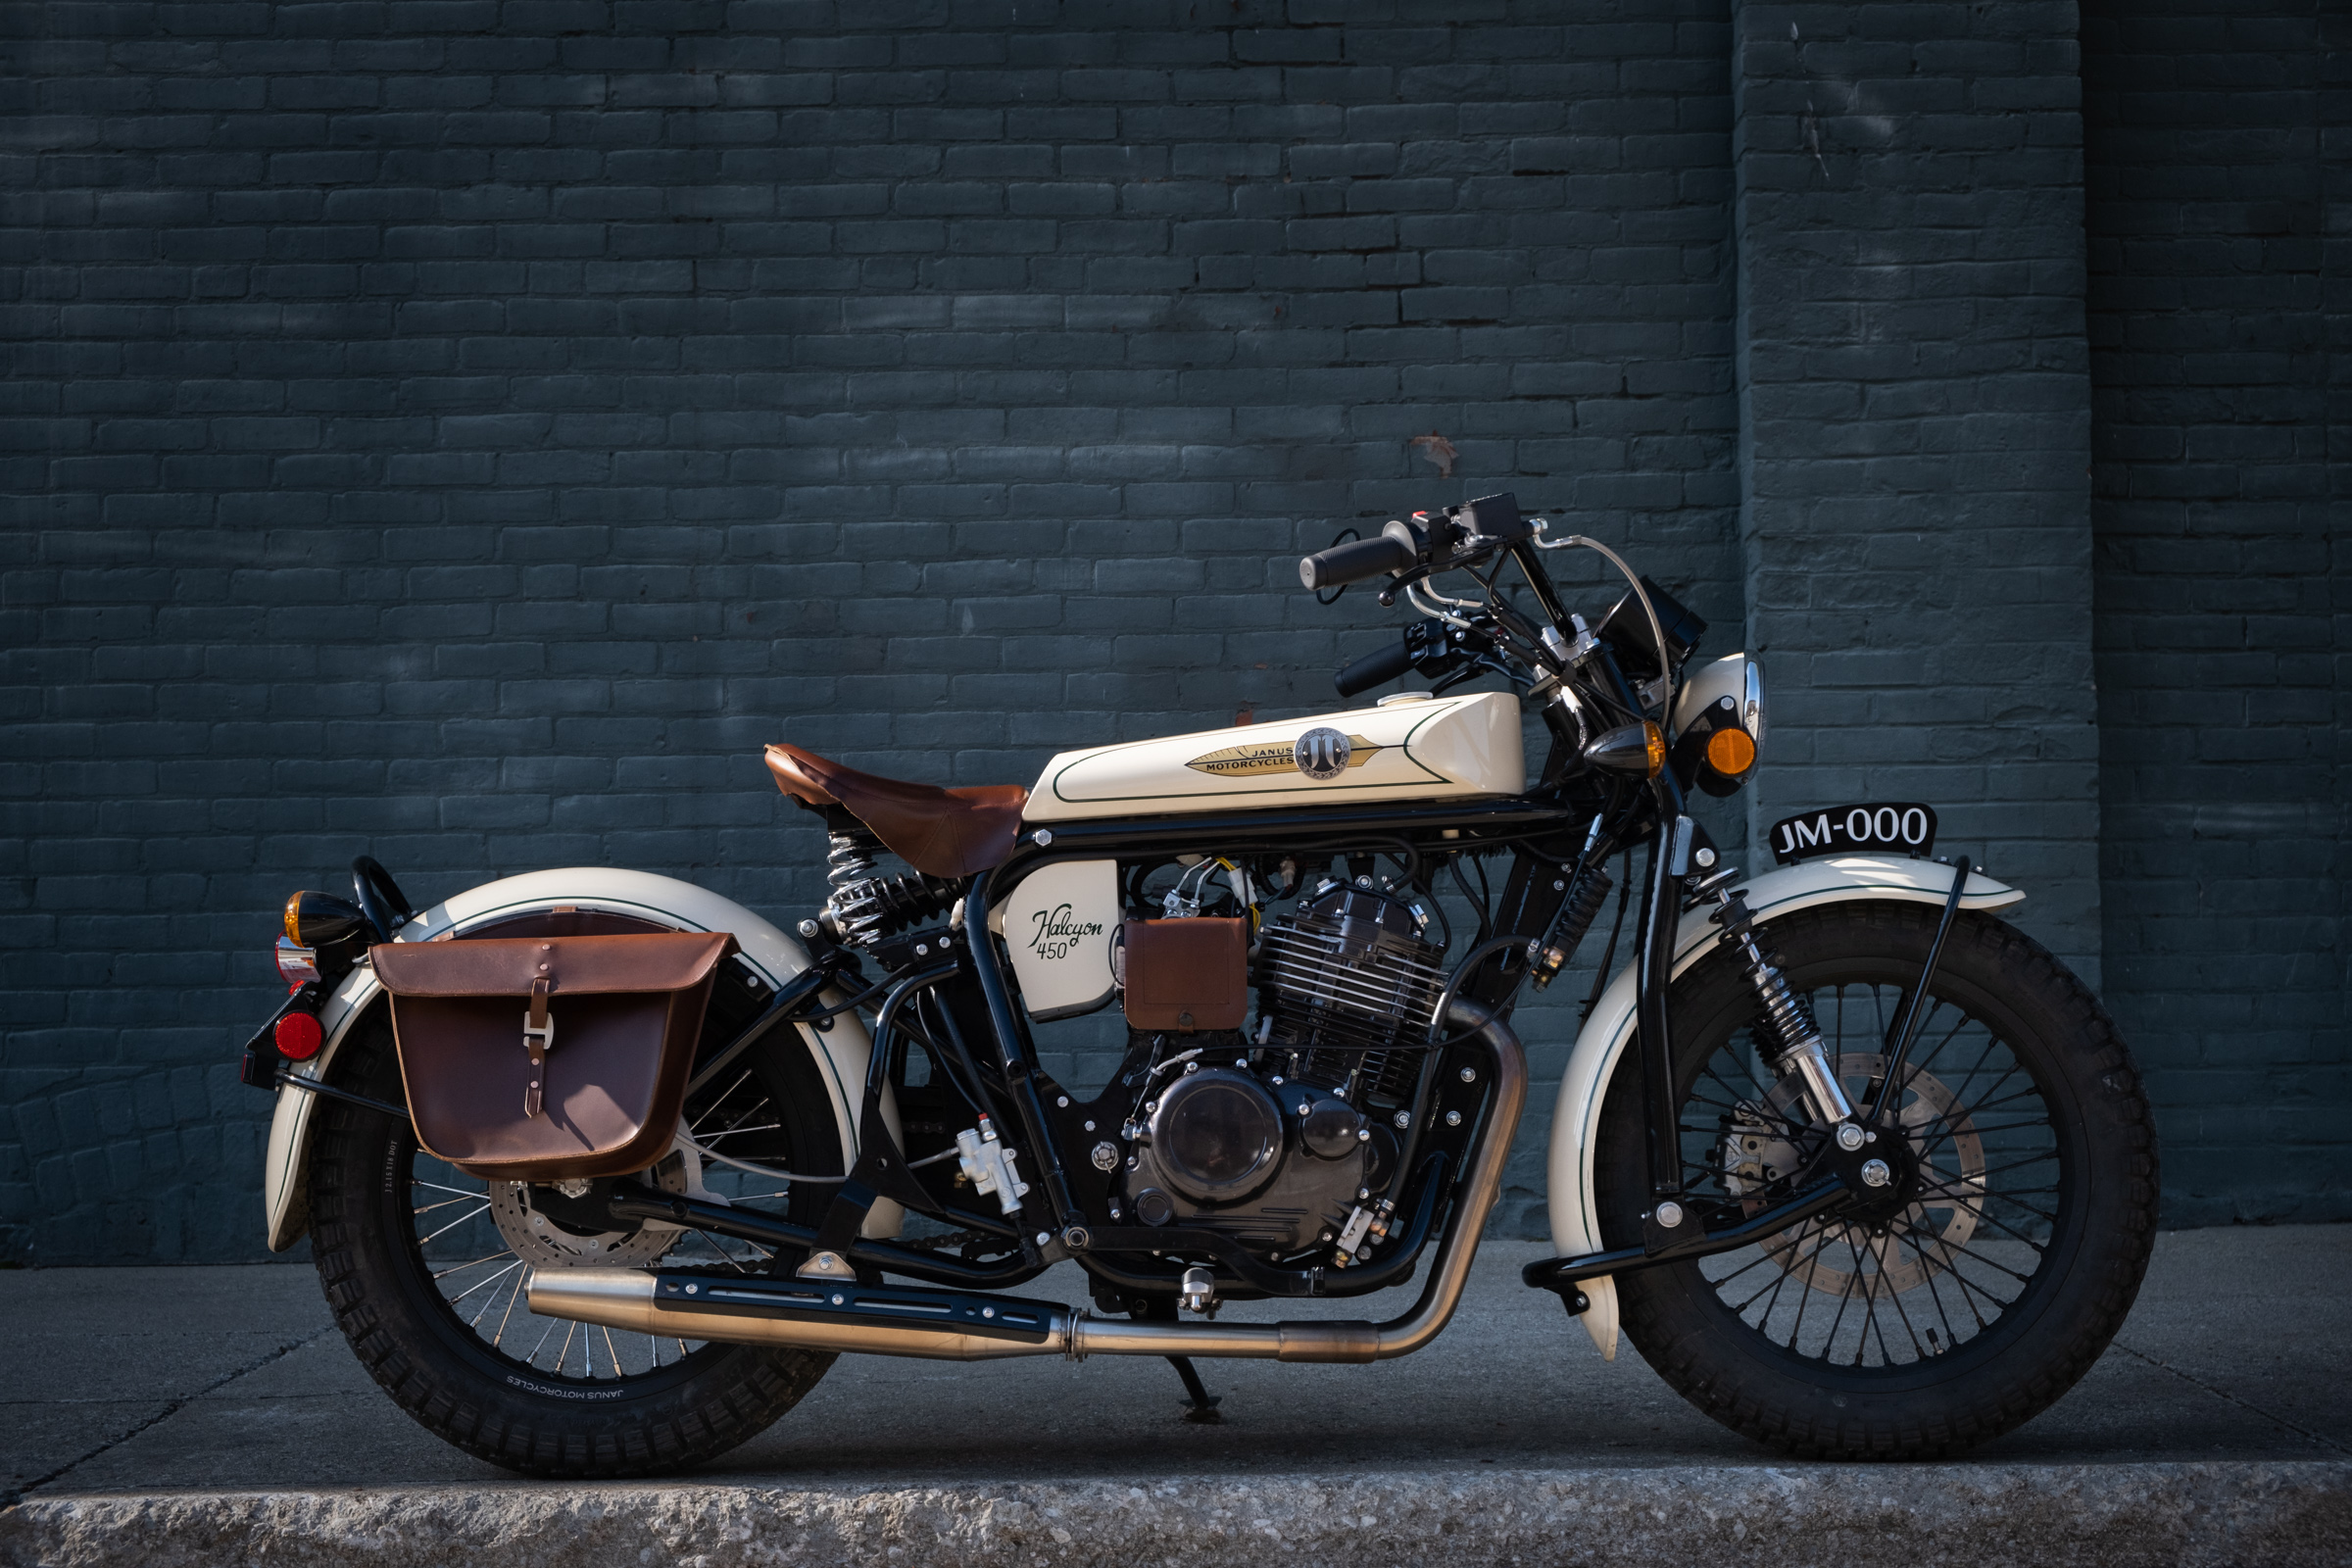 A side view of the Halcyon 450 from Janus Motorcycles